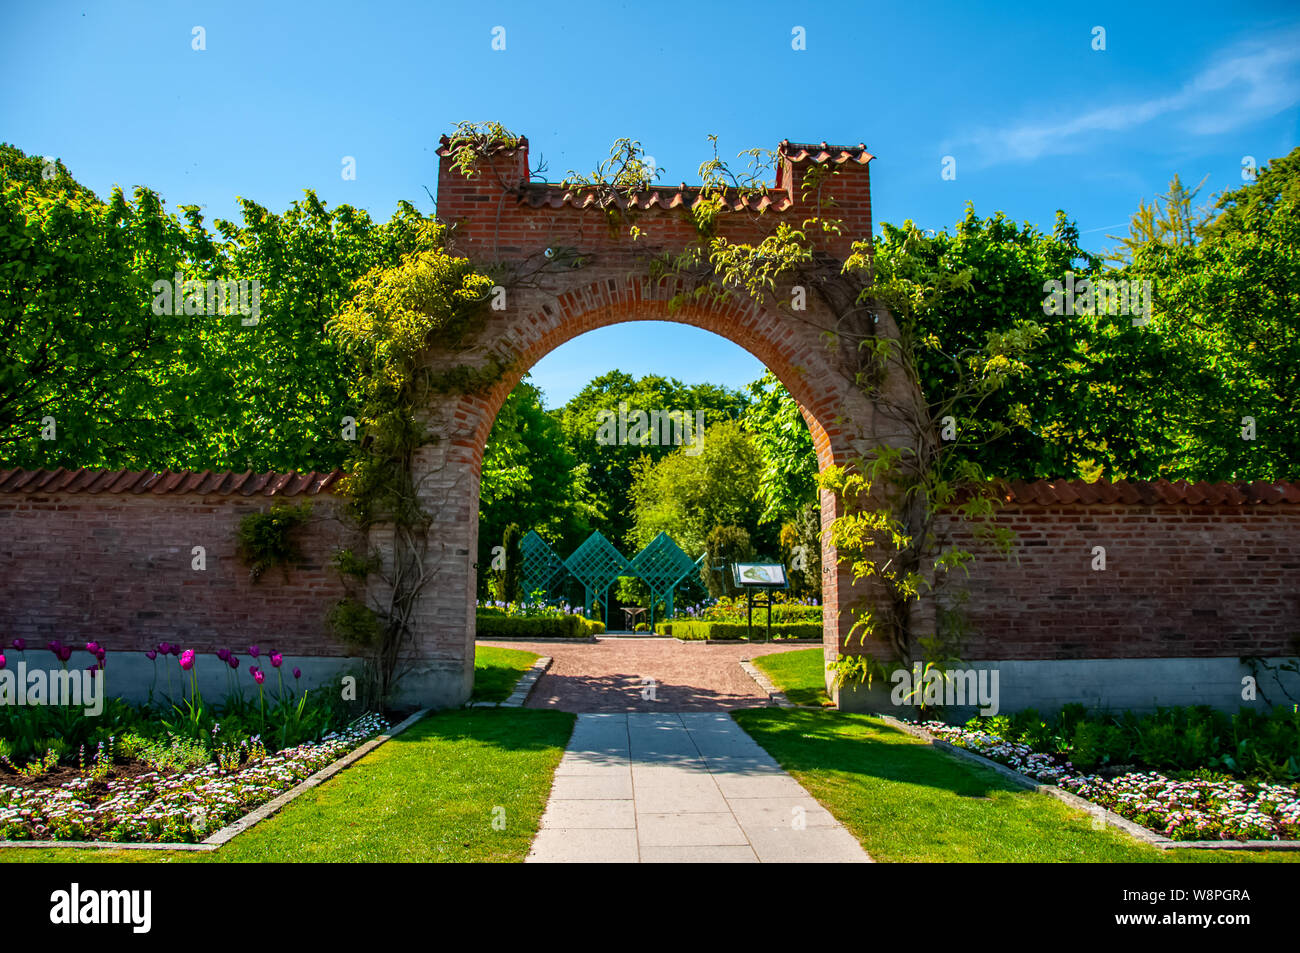 The door from the wall in the Pildammsparken park in the city of Malmo, Sweden Stock Photo